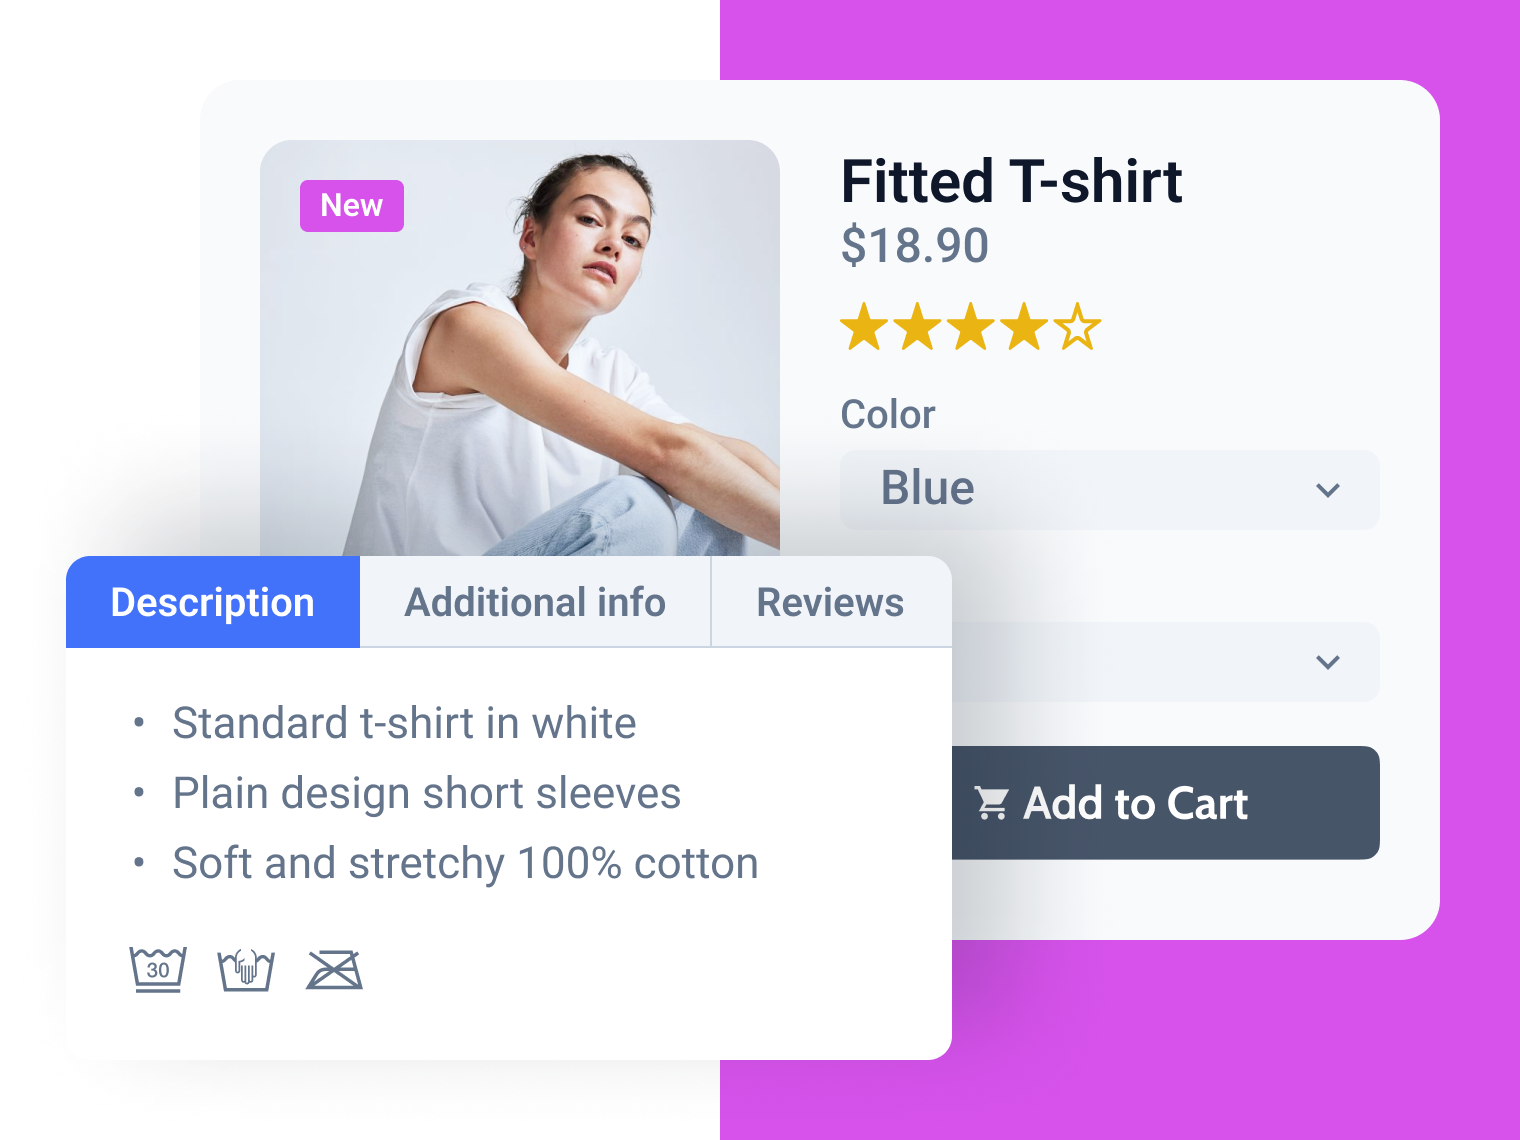 product attributes on the single product page